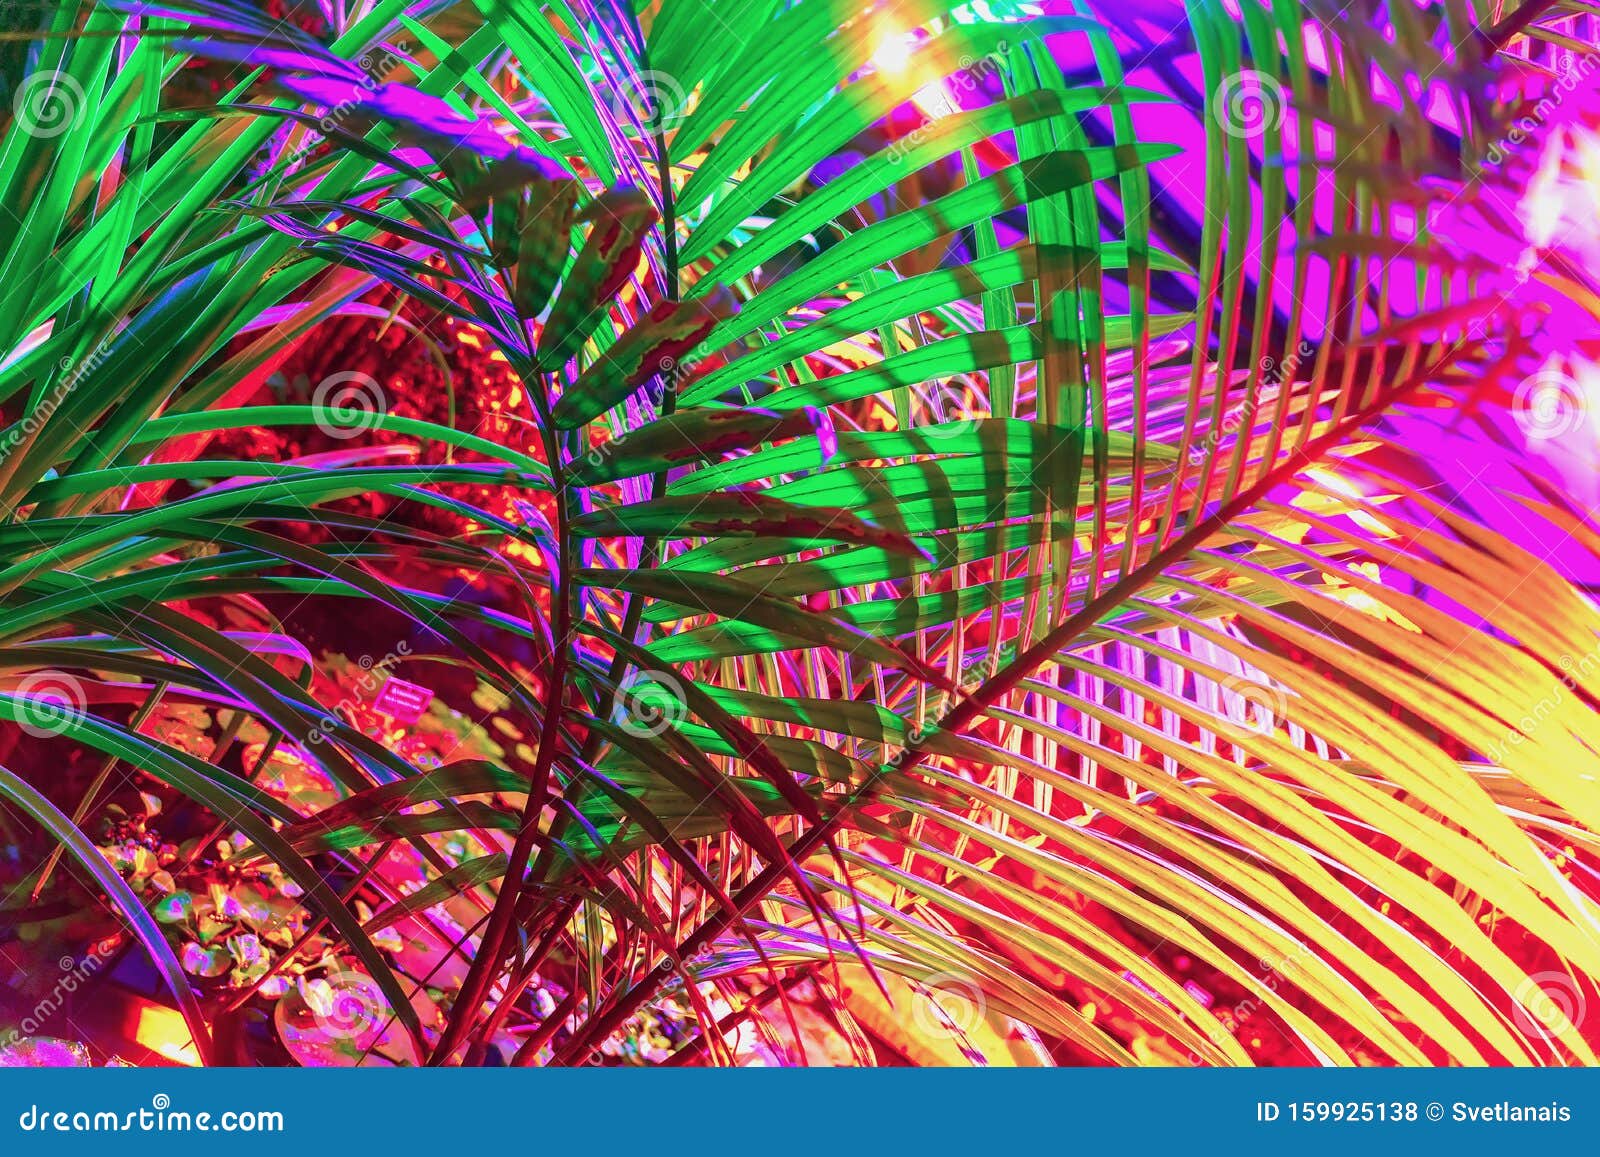 Tropical Natural Palm Tree Branches Close-up, Fashionable Neon Colors